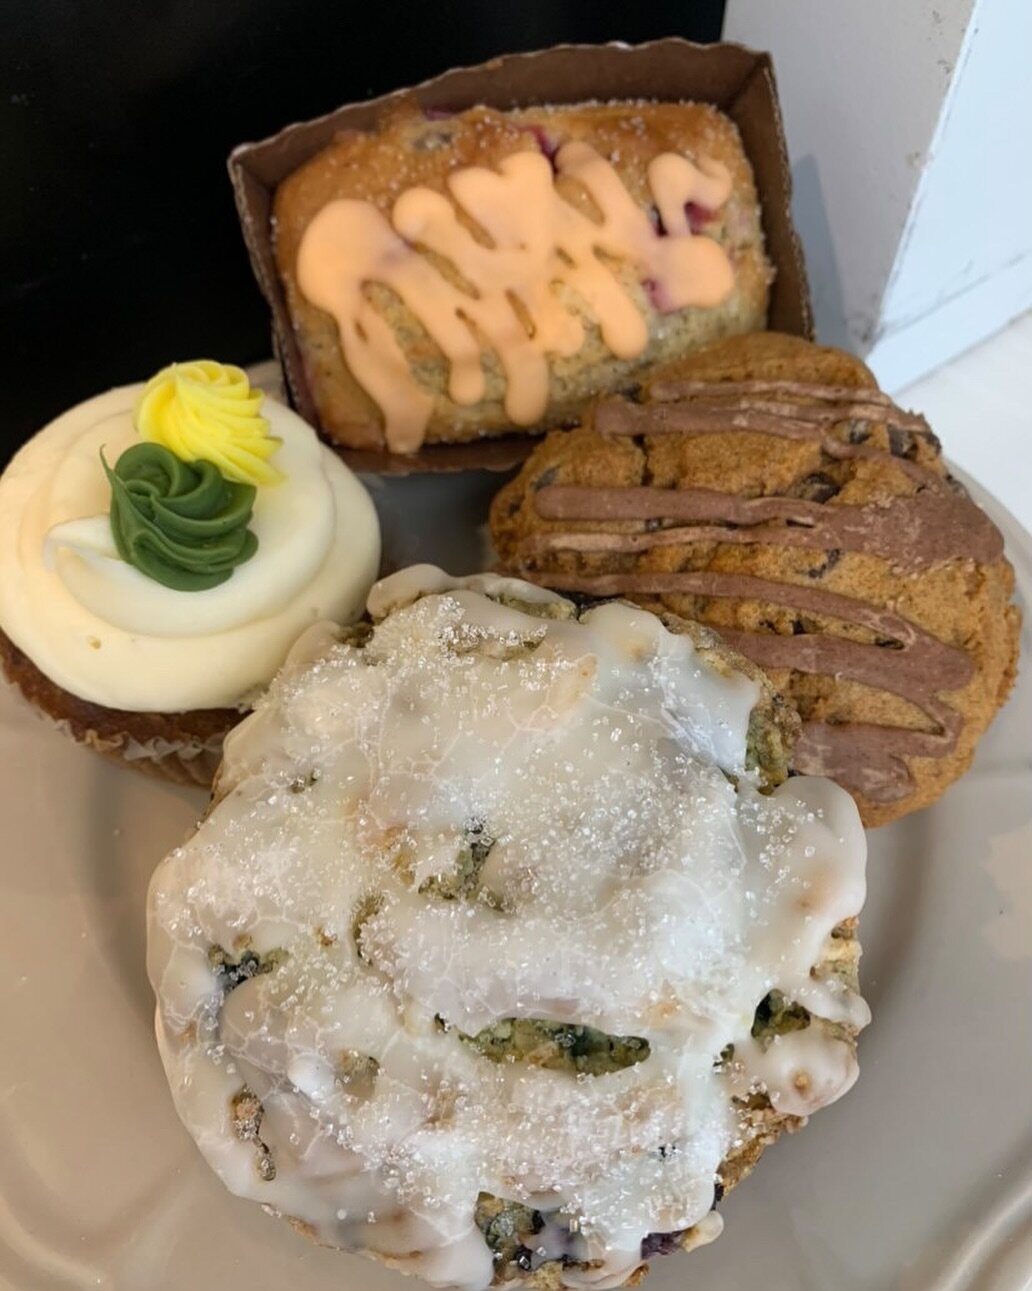 Need gluten free options? We have you covered! Scones, loaves, cupcakes and cookies! Offered daily in house and can be ordered for all of your event needs! 

#buffalony #orchardpark #patisserie #glutenfree #glutenfreedessert